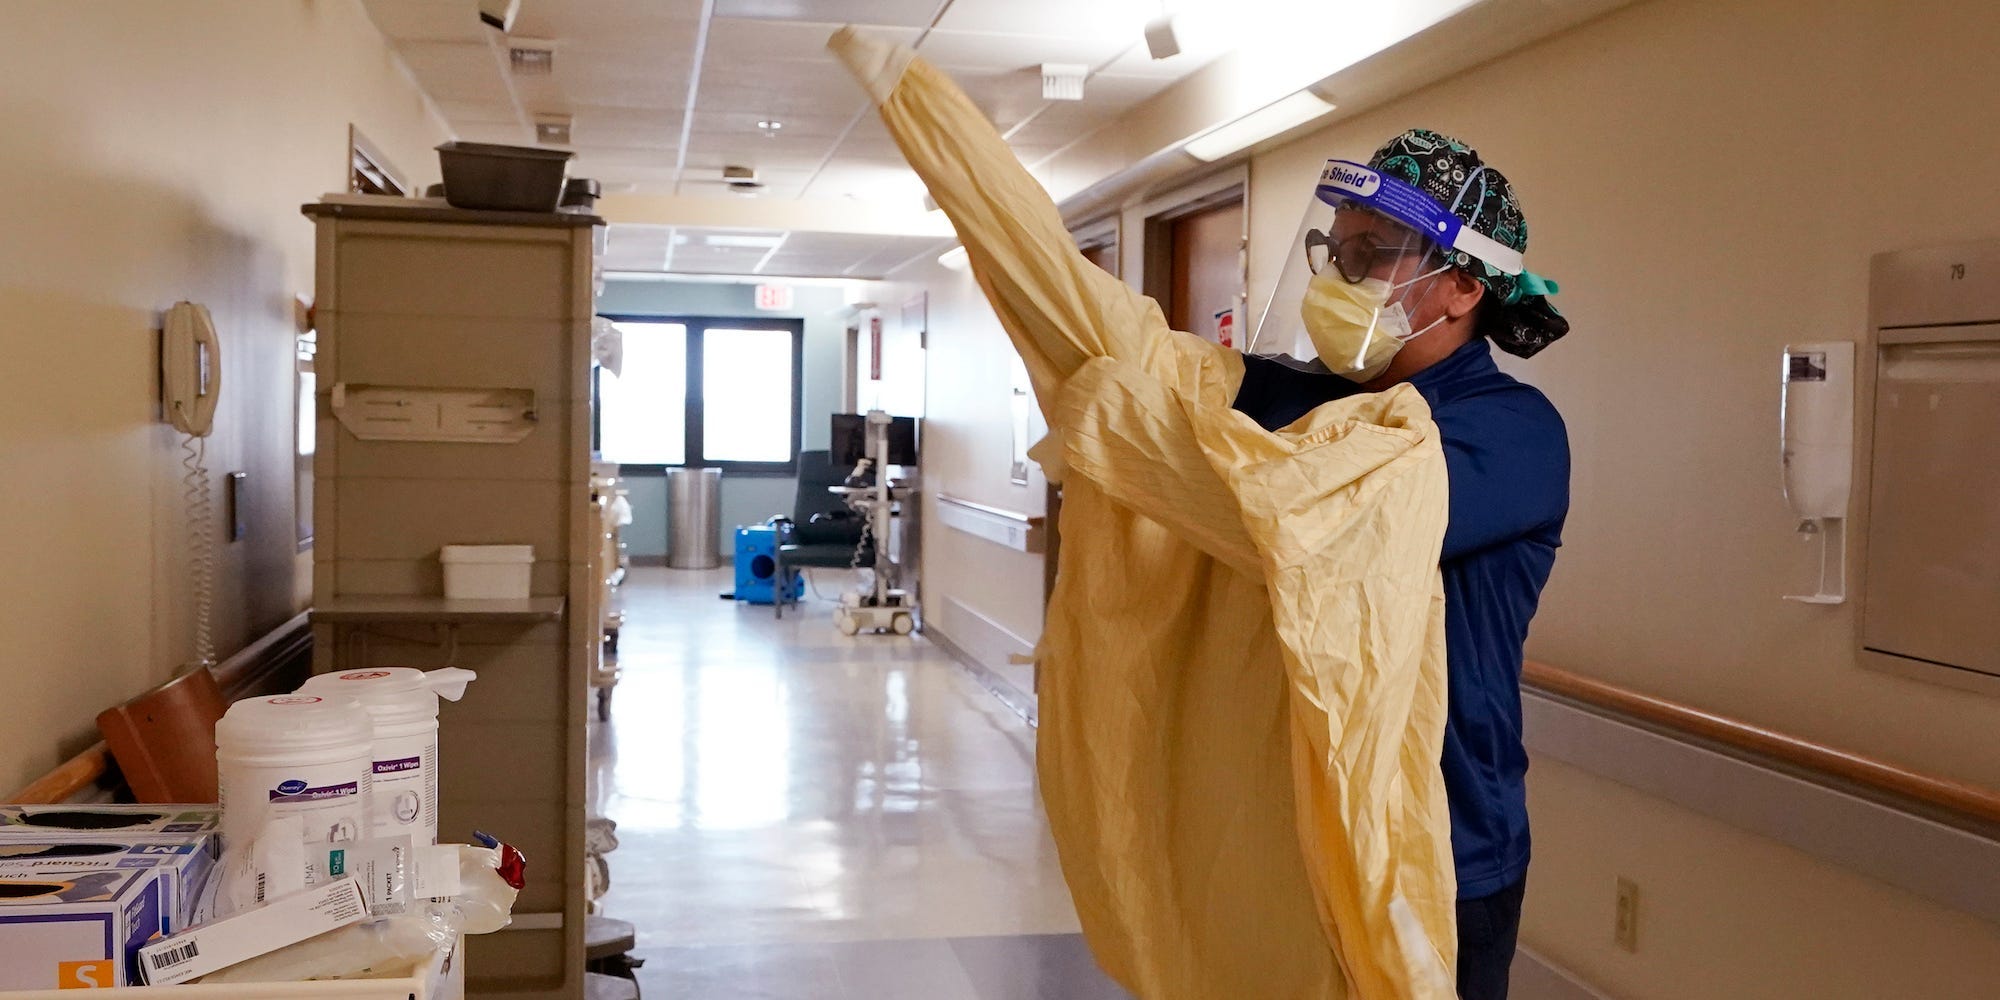 Registered Nurse Monica Quintana dons protective gear before entering a room at the William Beaumont hospital, April 21, 2021 in Royal Oak, Mich.